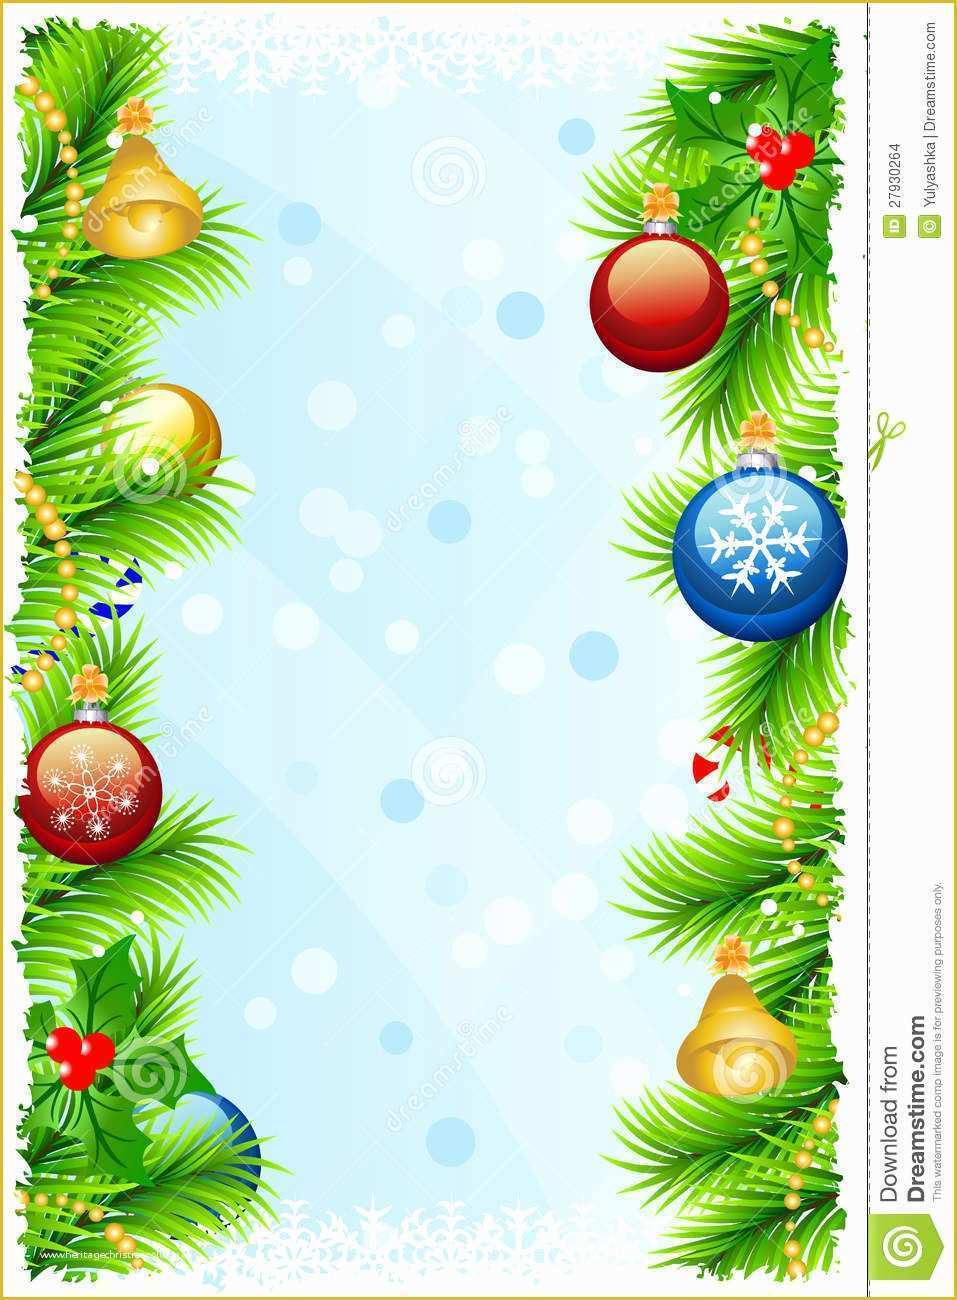 Free Greeting Card Templates Of Template Christmas Greeting Card Stock Vector Image